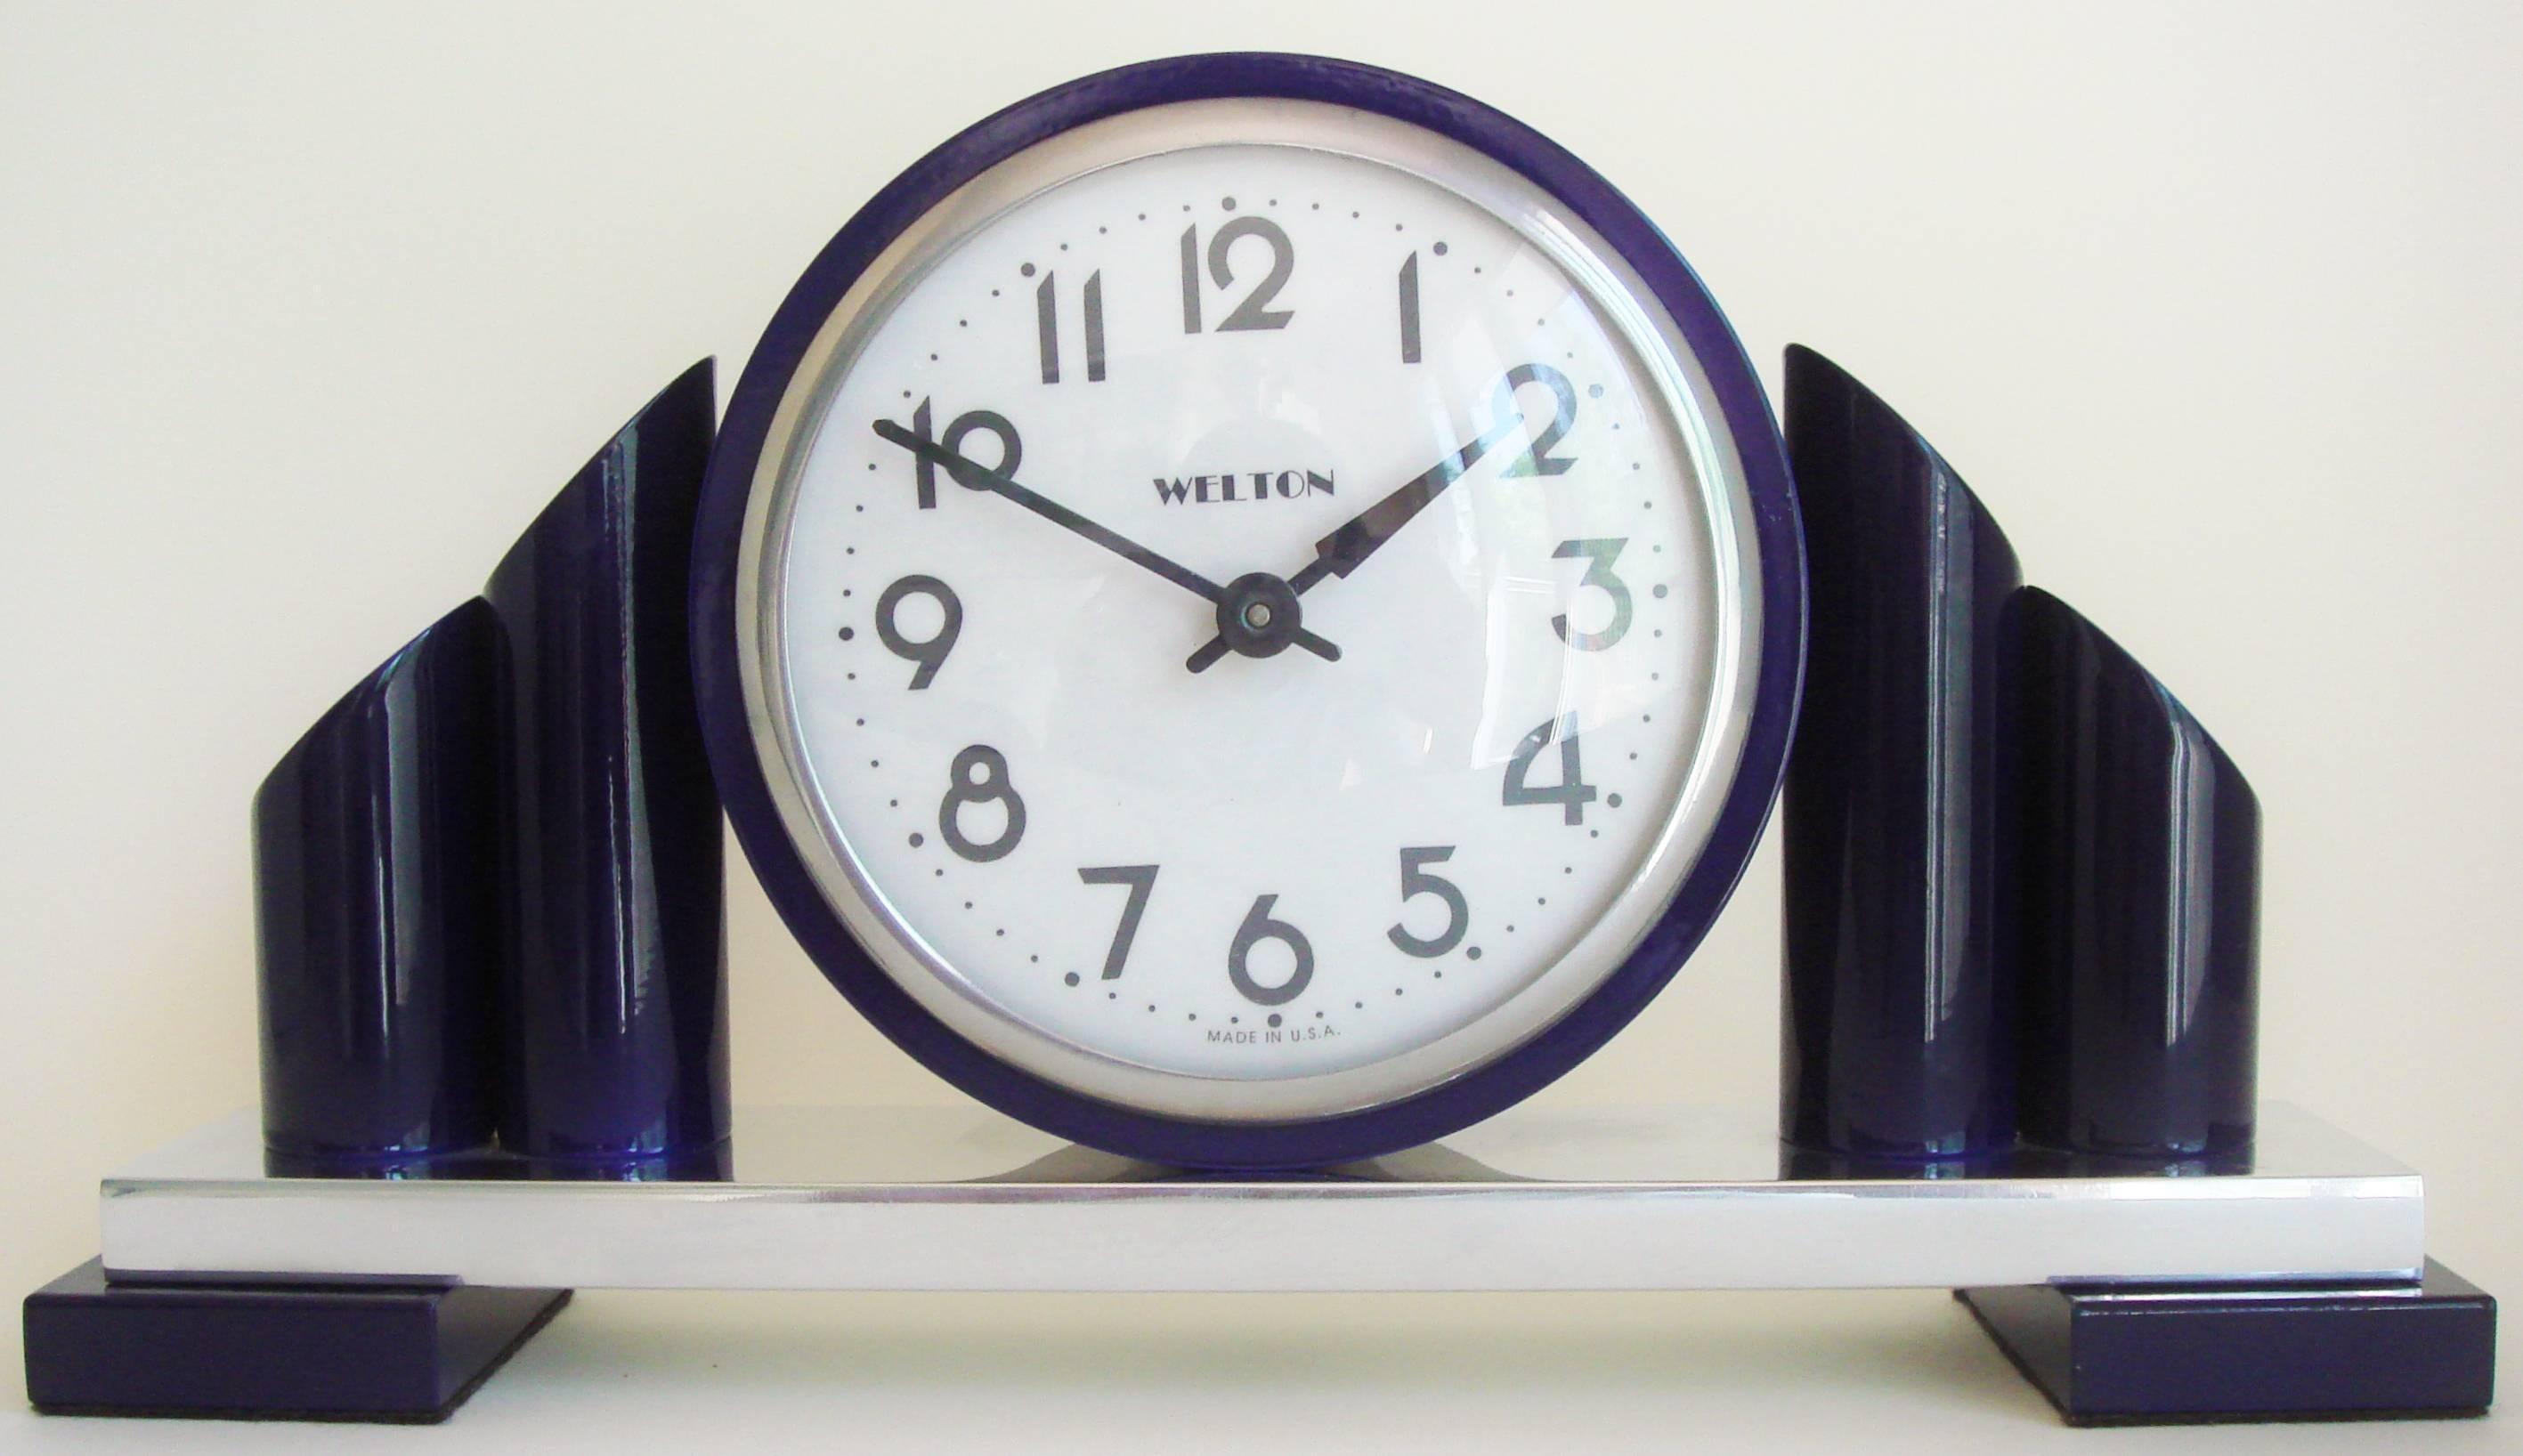 This very stylish American Art Deco Revival mechanical mantel clock features a body in high gloss, metallic and royal blue enamel with chrome accents that houses a traditional brass 8-day movement. Both the numerals and the Welton name are in Art